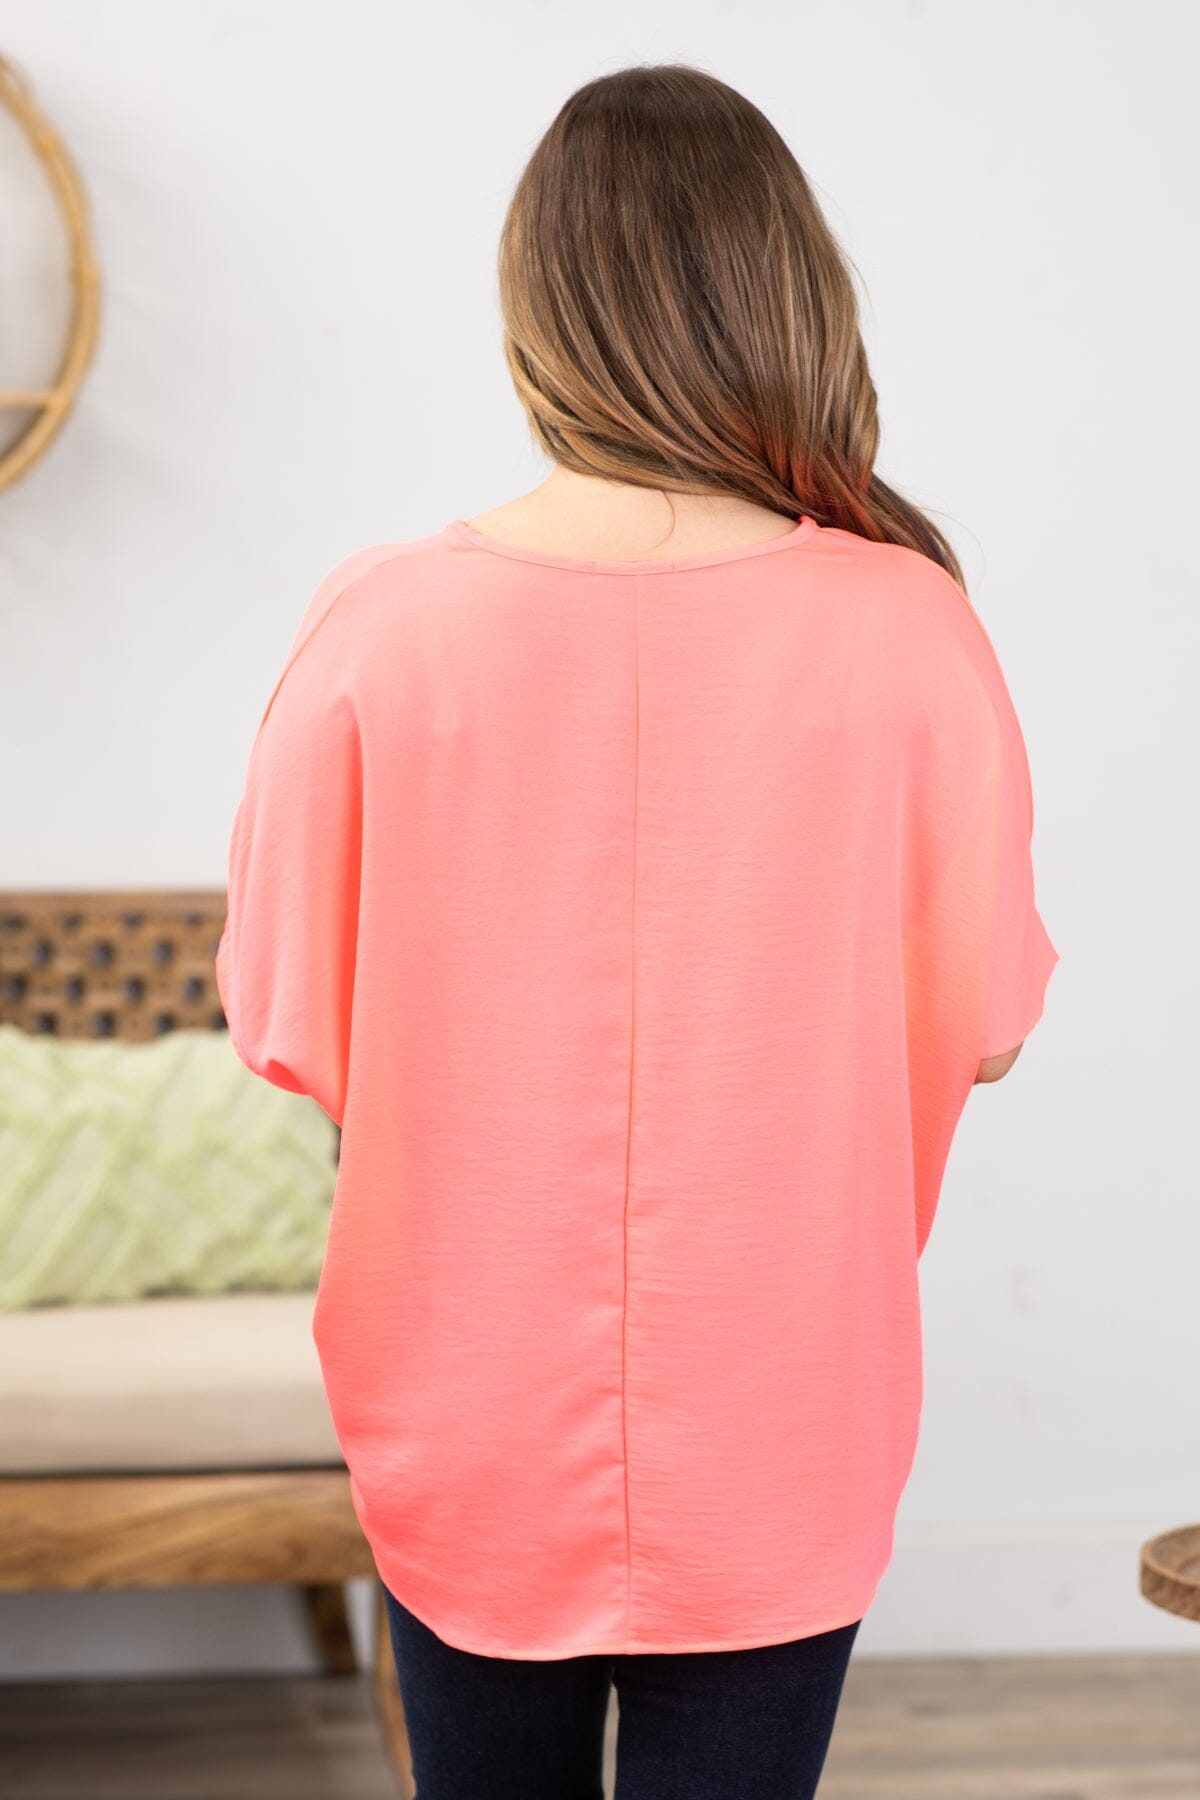 Neon Pink V-Neck Top With Pocket Detail - Filly Flair